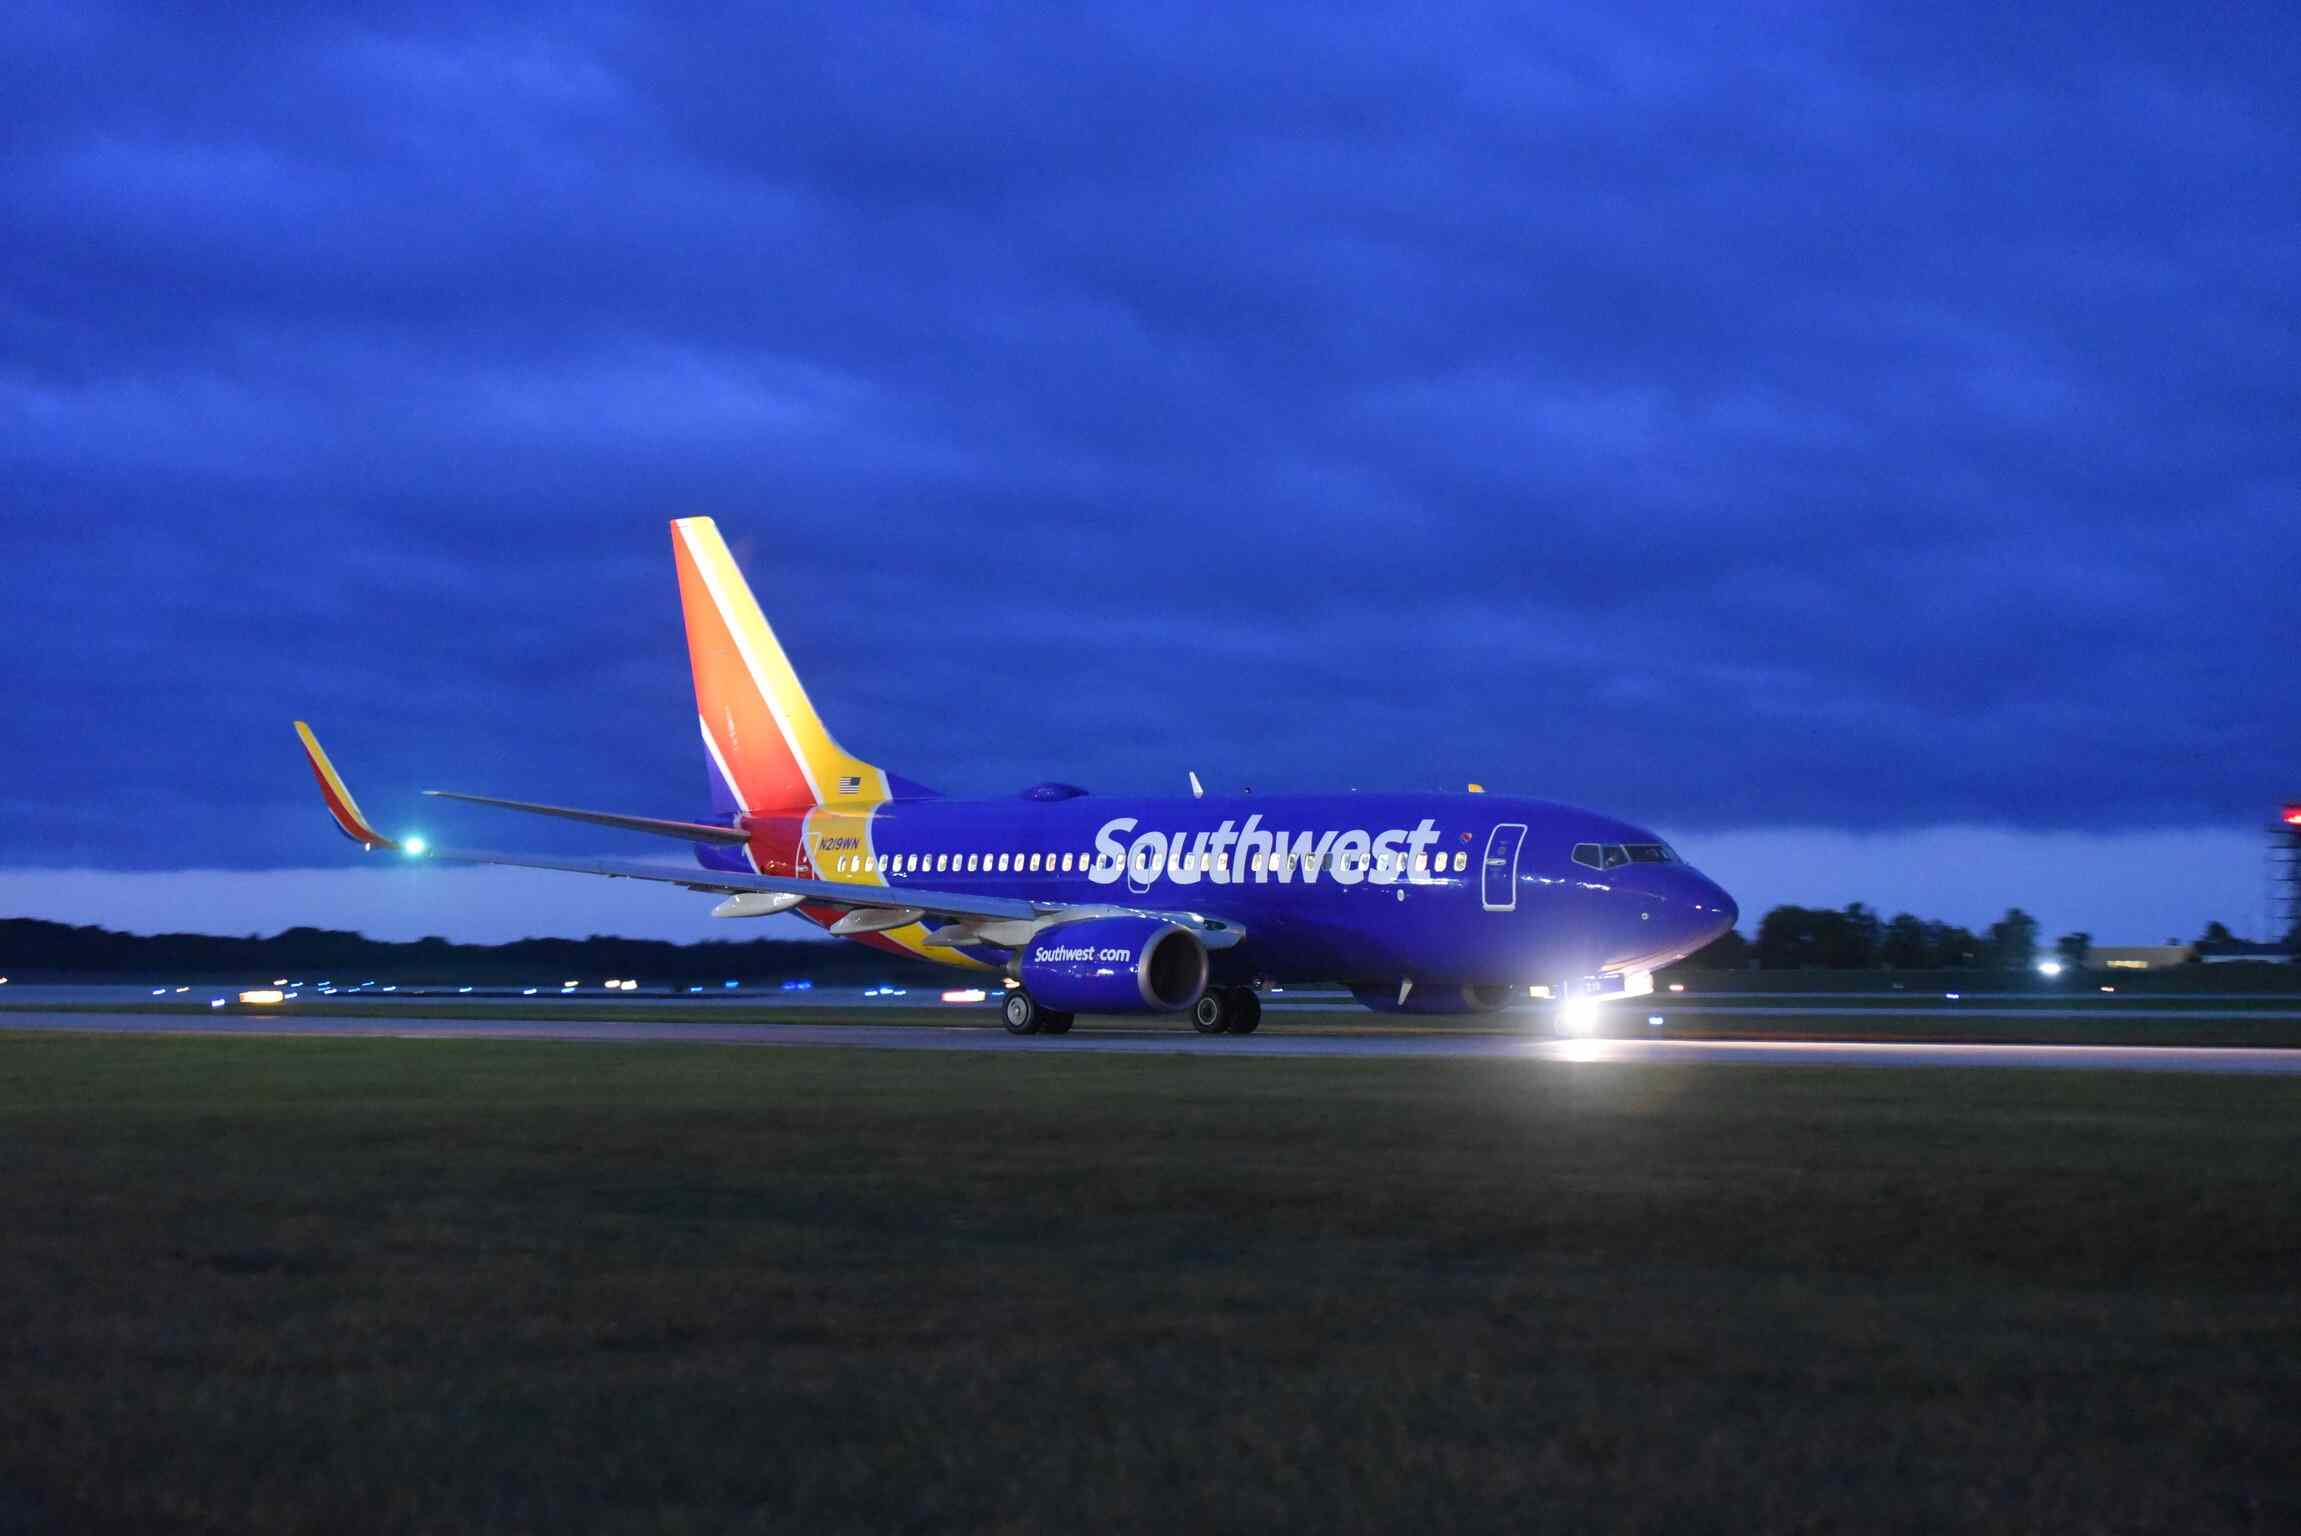 How do I speak to a Southwest airline?